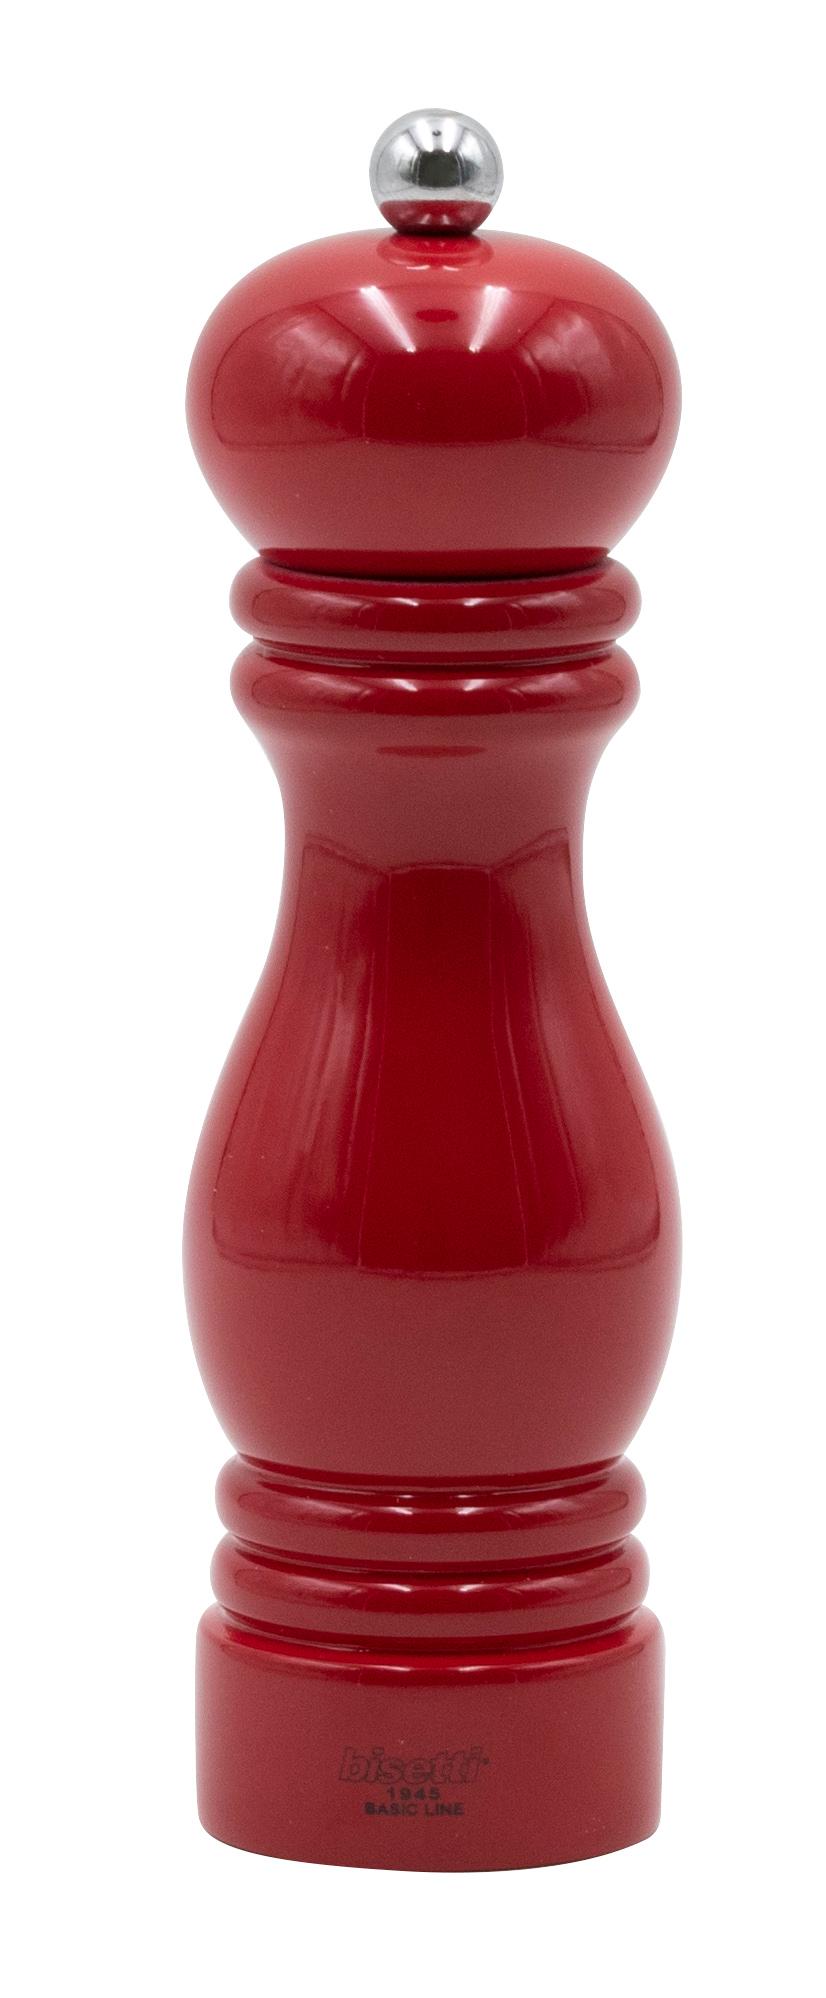 Sorrento pepper mill, red, 190mm